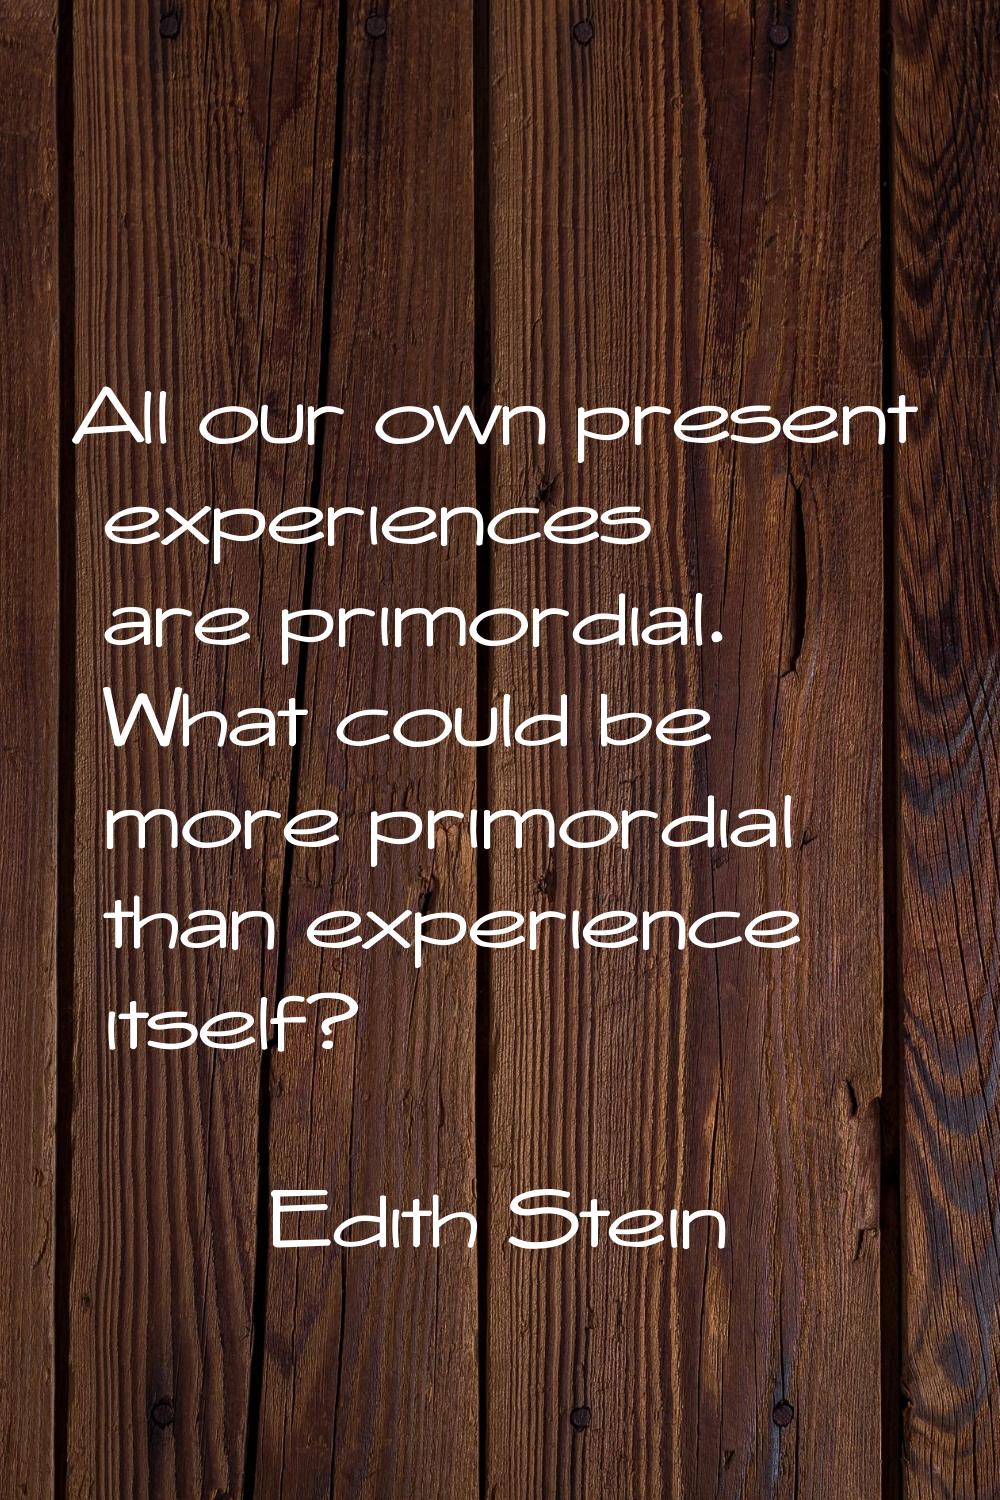 All our own present experiences are primordial. What could be more primordial than experience itsel